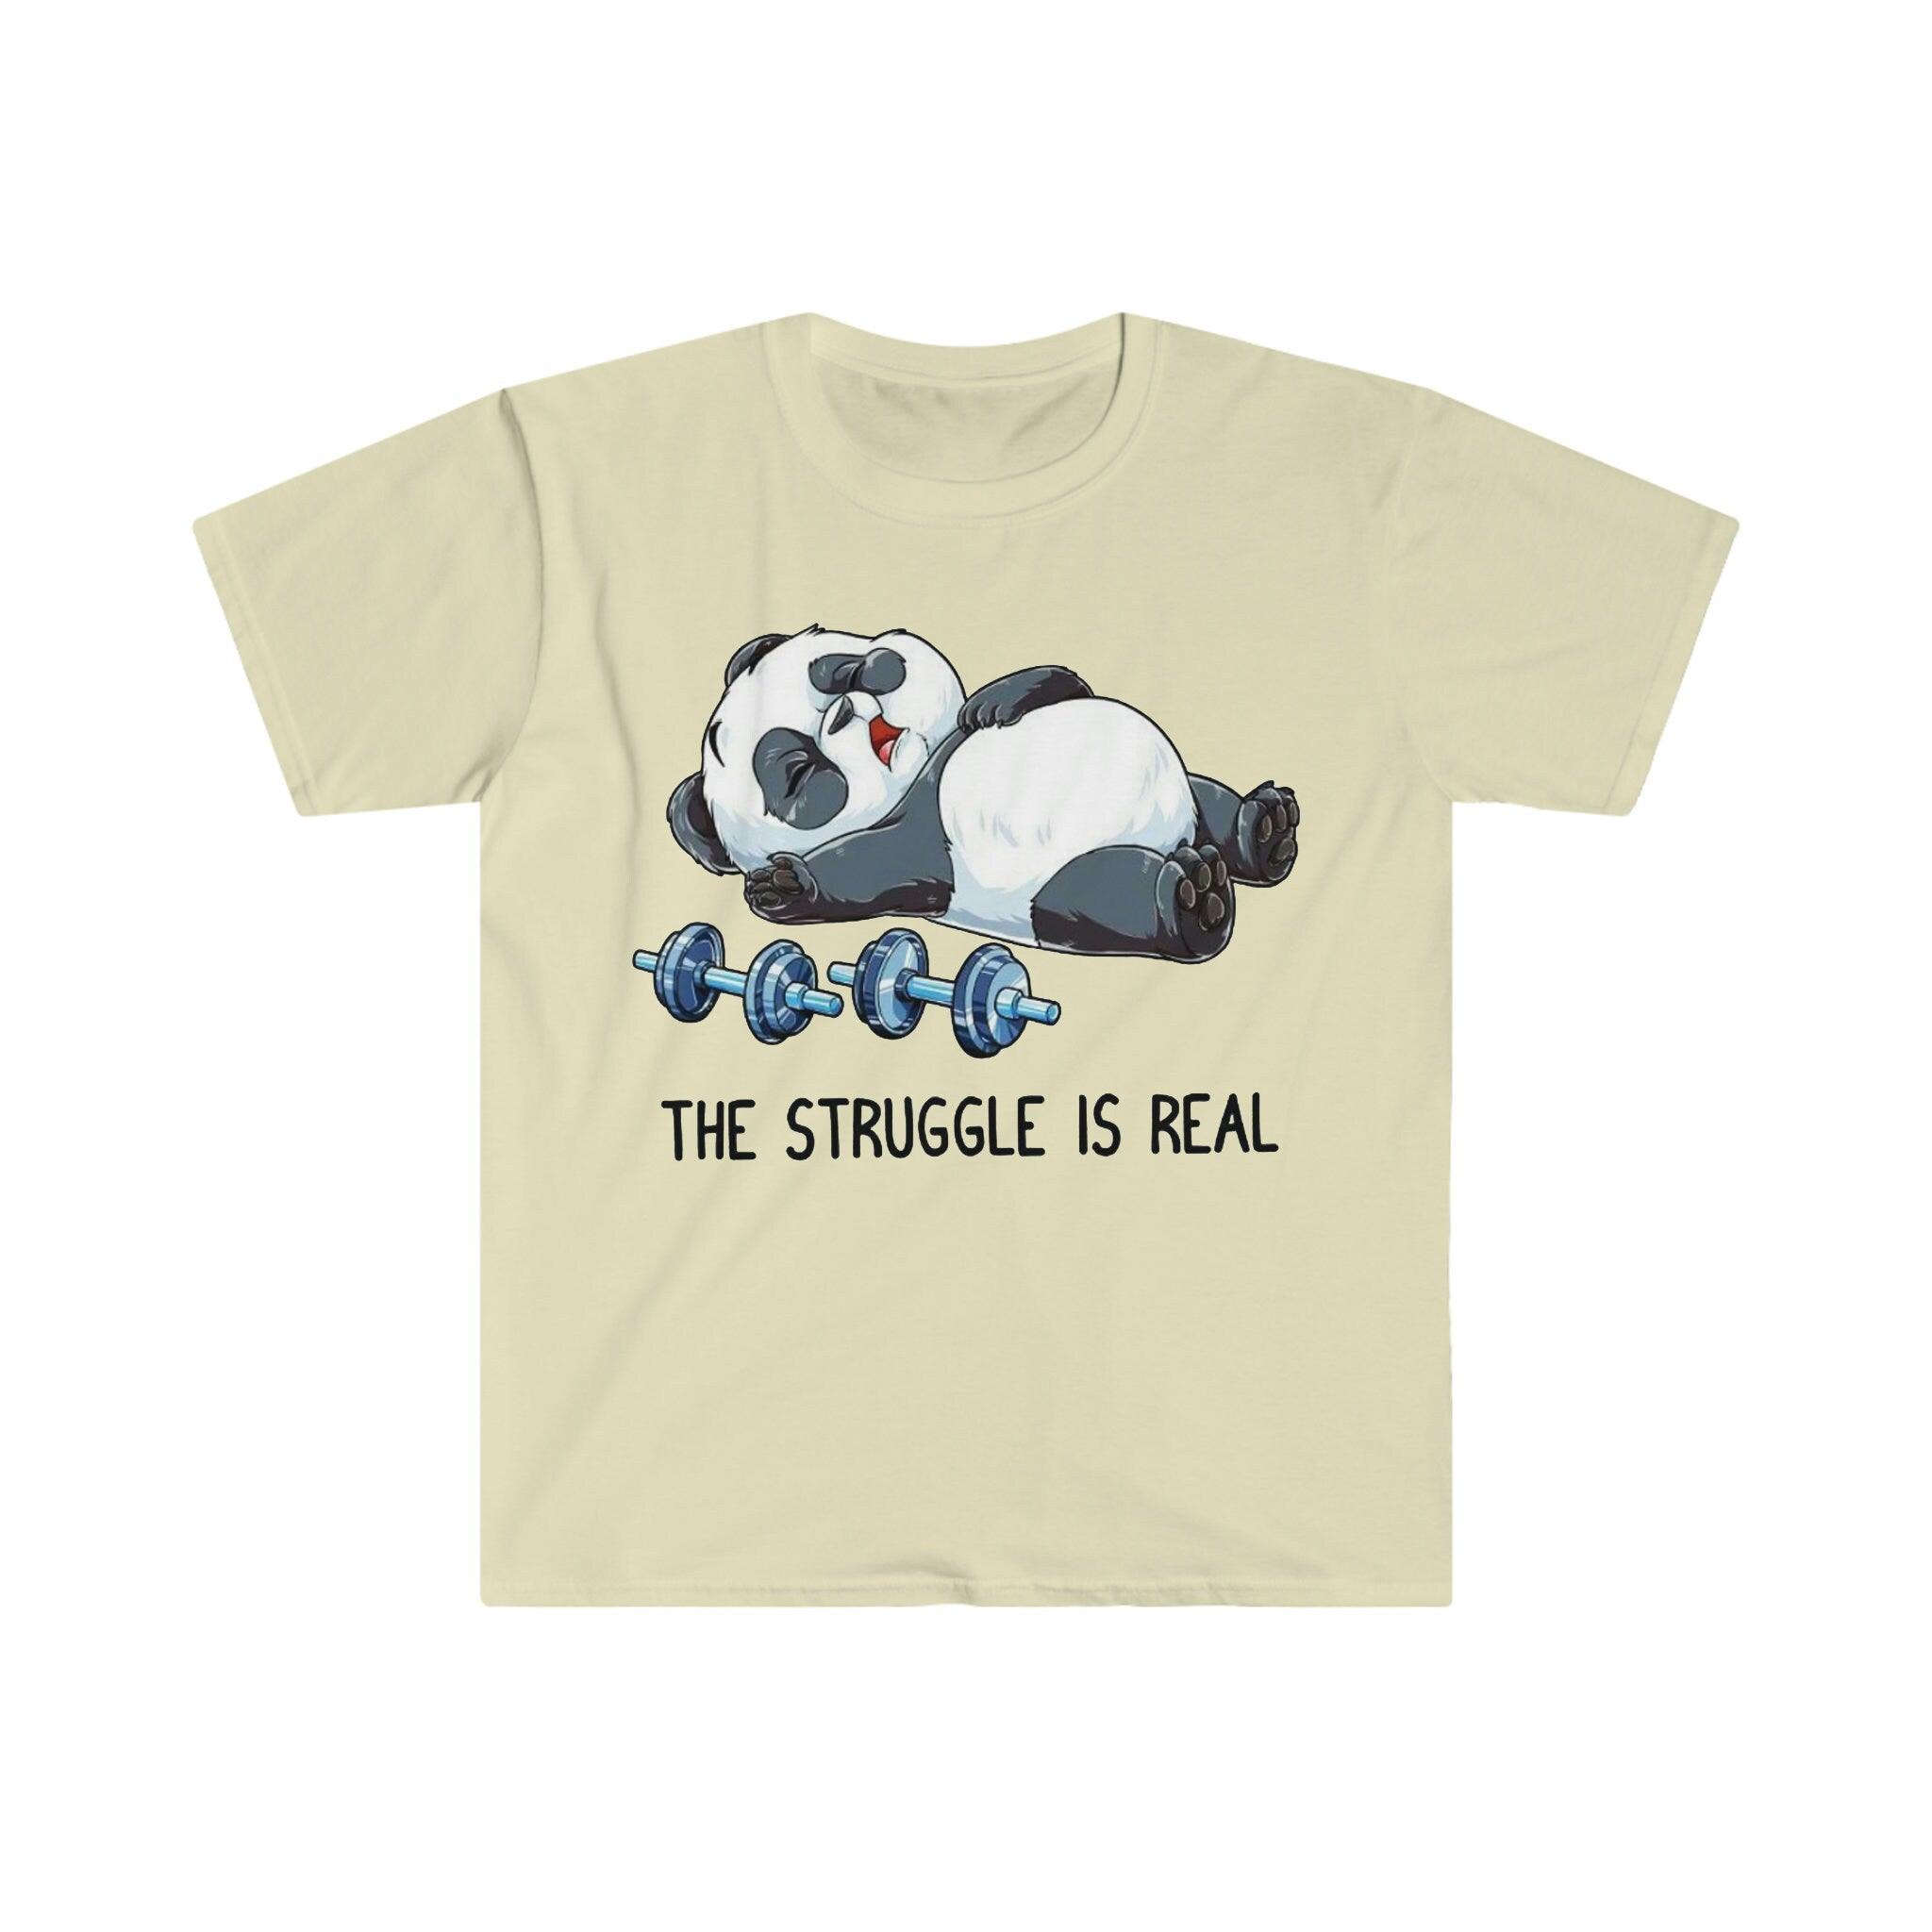 The Struggle Is Real Panda Weightlifting T-Shirts, Weightlifting Fitness Gym Funny T-Shirt, Workout Shirt ,Fitness Shirt - plusminusco.com